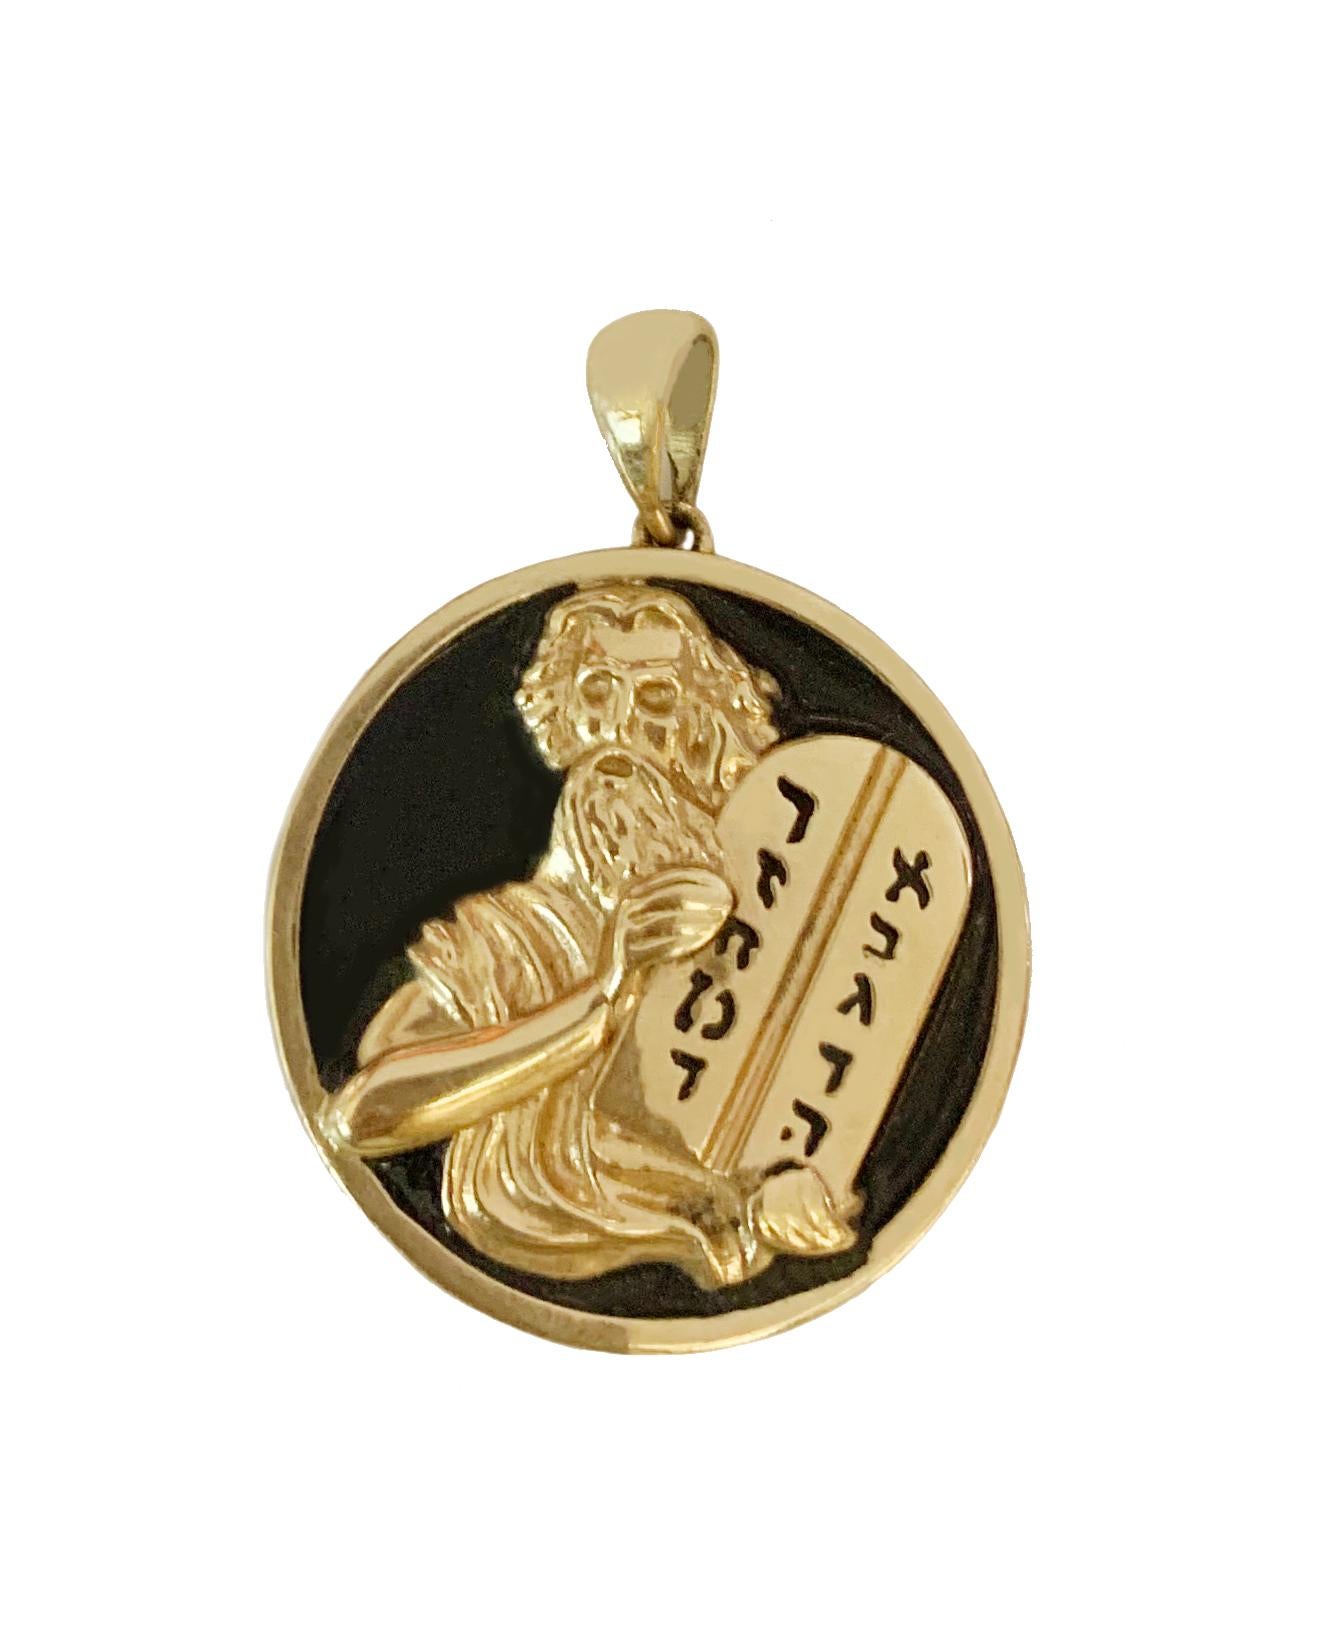 -David's Star Reversible Torah Pendant
-14k Yellow Gold
-Dimension: 26mm
-With bail: 34.5mm 
-Weight: 14gr
-Diamond: 0.05ct 
-Clarity :VS
-Color Grade: G
-Pendant: double-sided
-Pendant has blue and black enamel 
- front is Black enamel 
-Back is